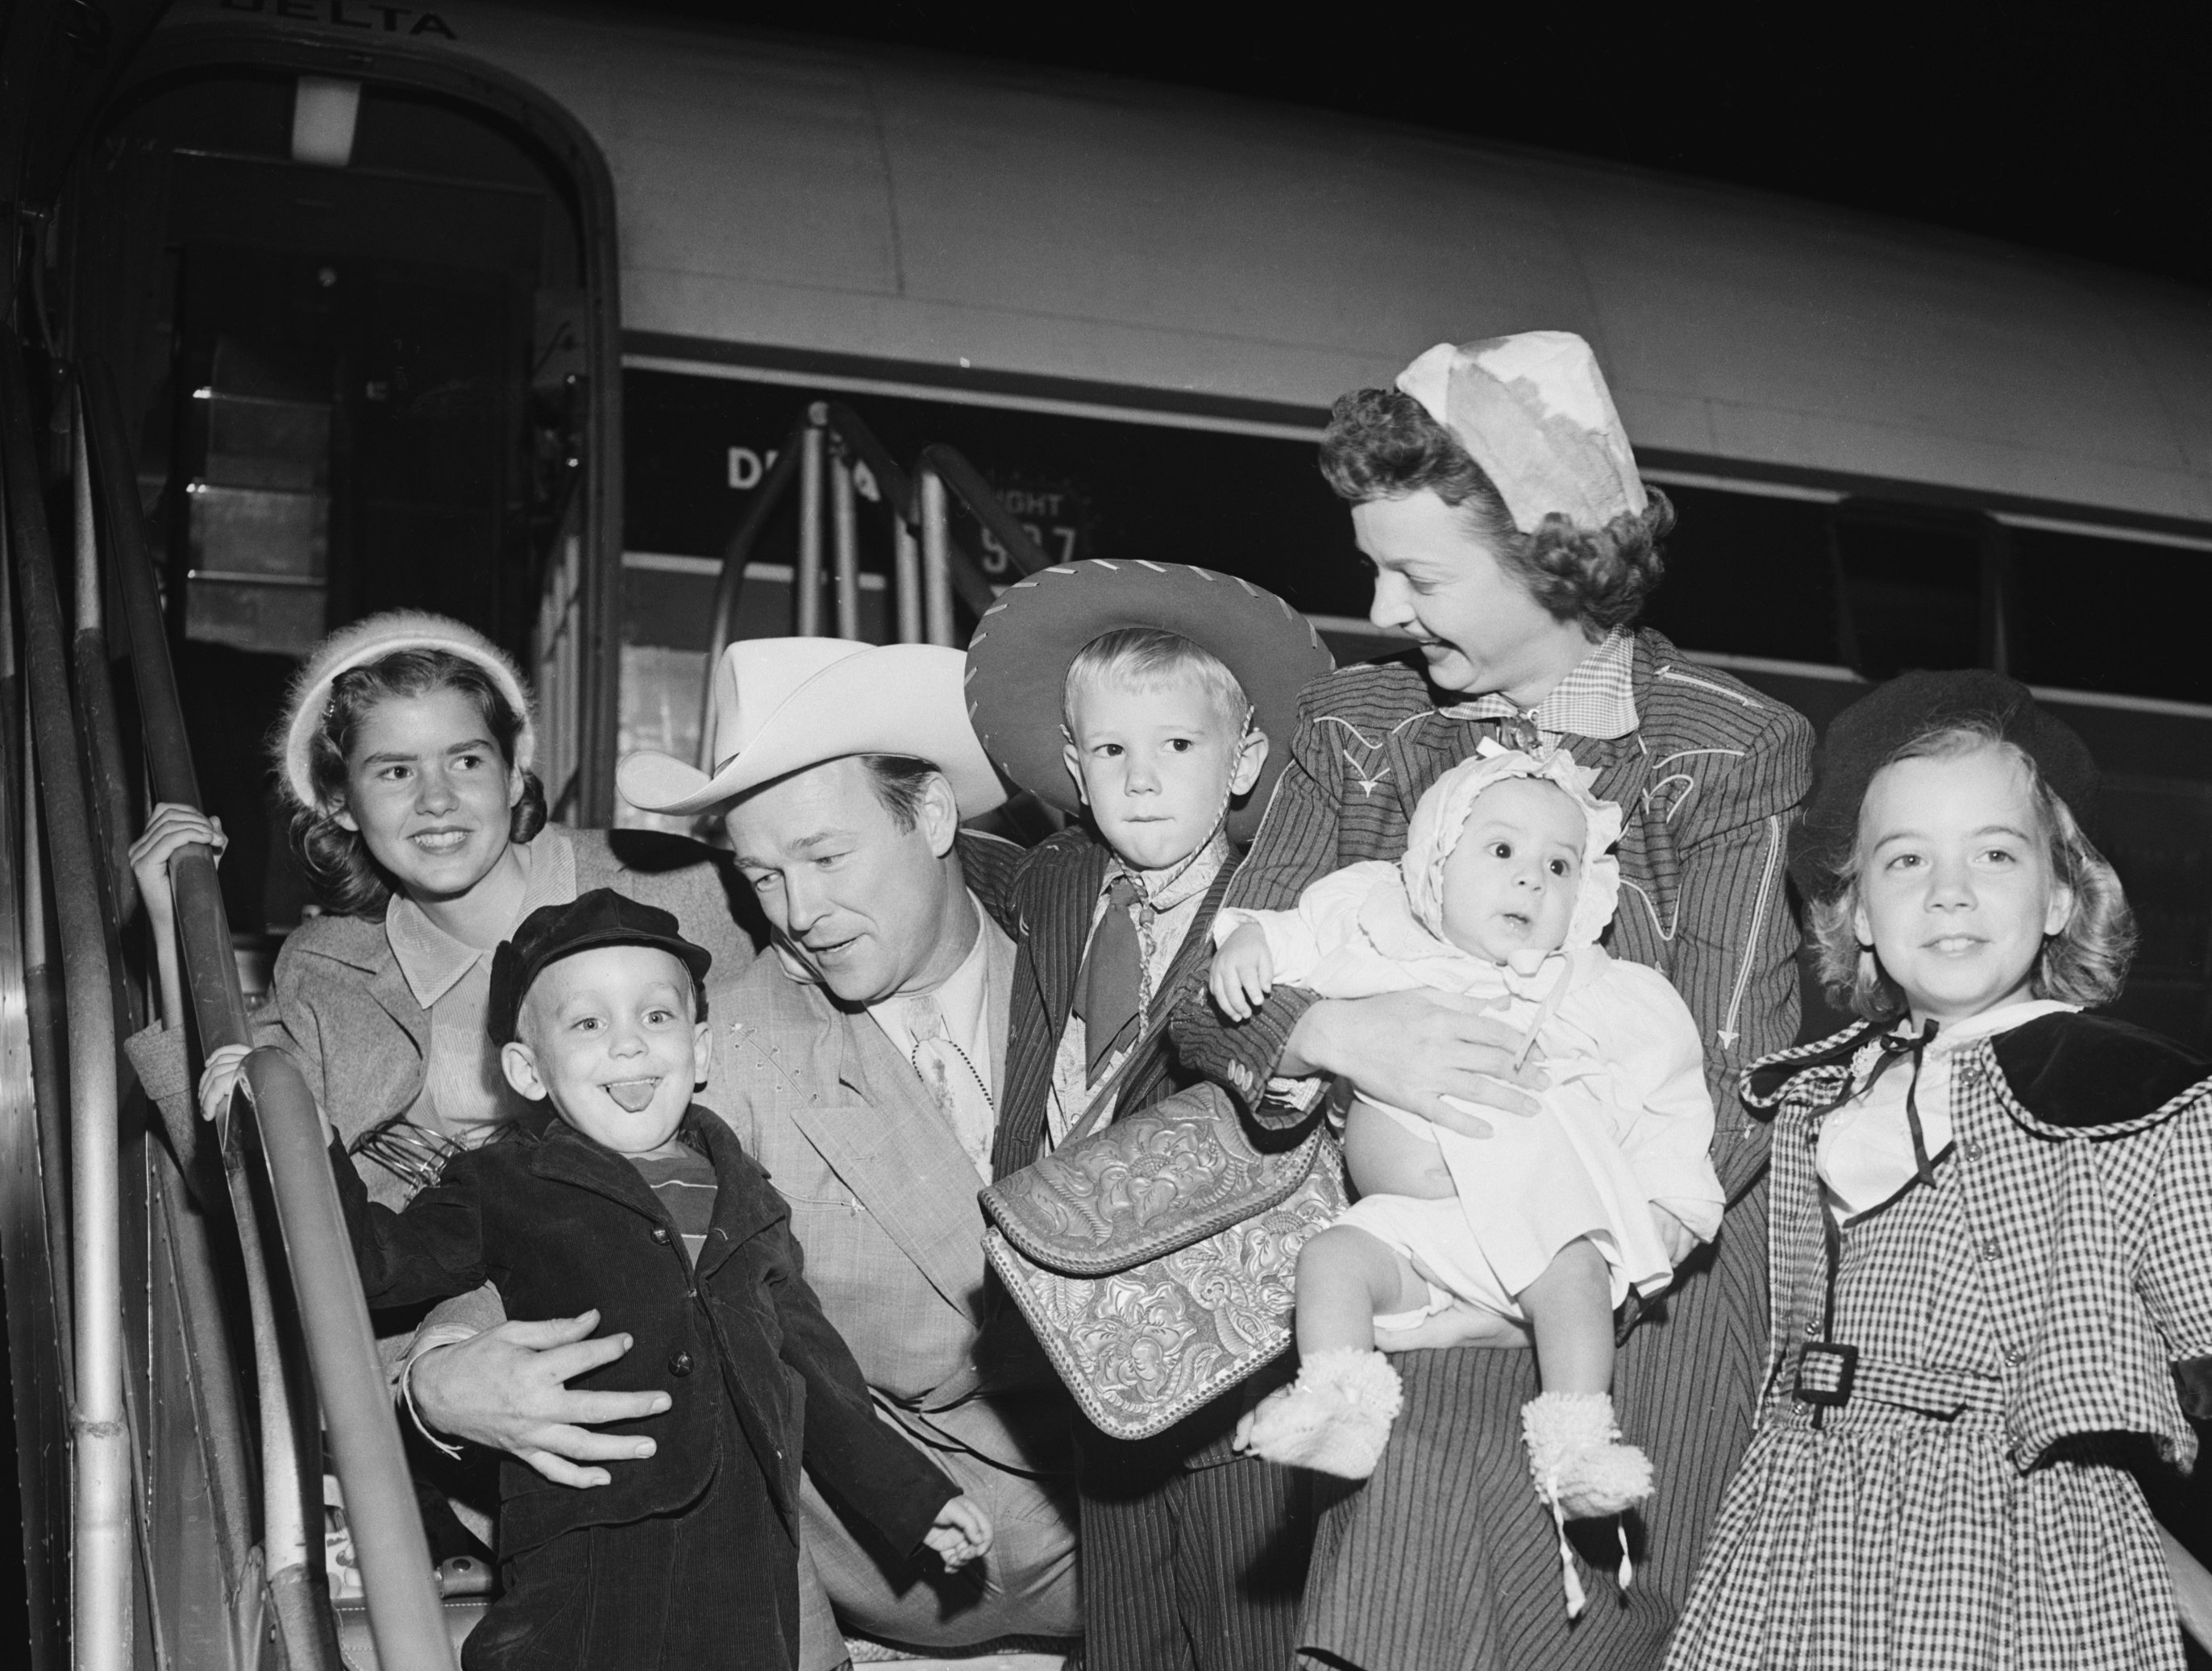  Cowboy-Actor Roy Rogers and actress wife Dale Evans arrive by plane in Los Angeles, Bringing with them two newly adopted children, five year old Sandy and five-month old Doe. | Source: Getty Images